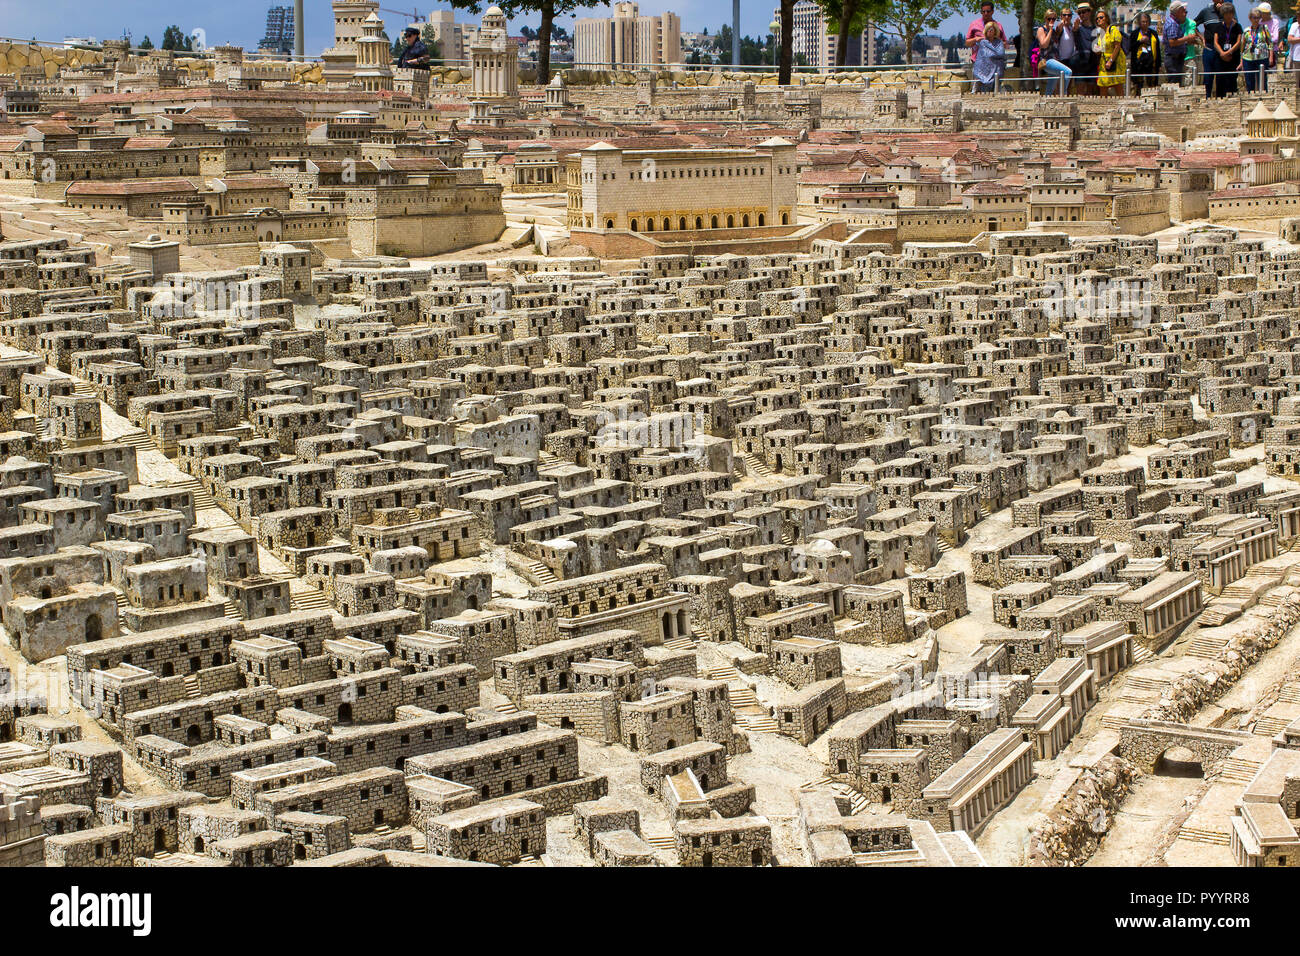 9 May 2018 Visitors walk around the outdoor scale model of the ancient city of Jerusalem at the Israel Museum in Jerusalem. The model has many arbitra Stock Photo